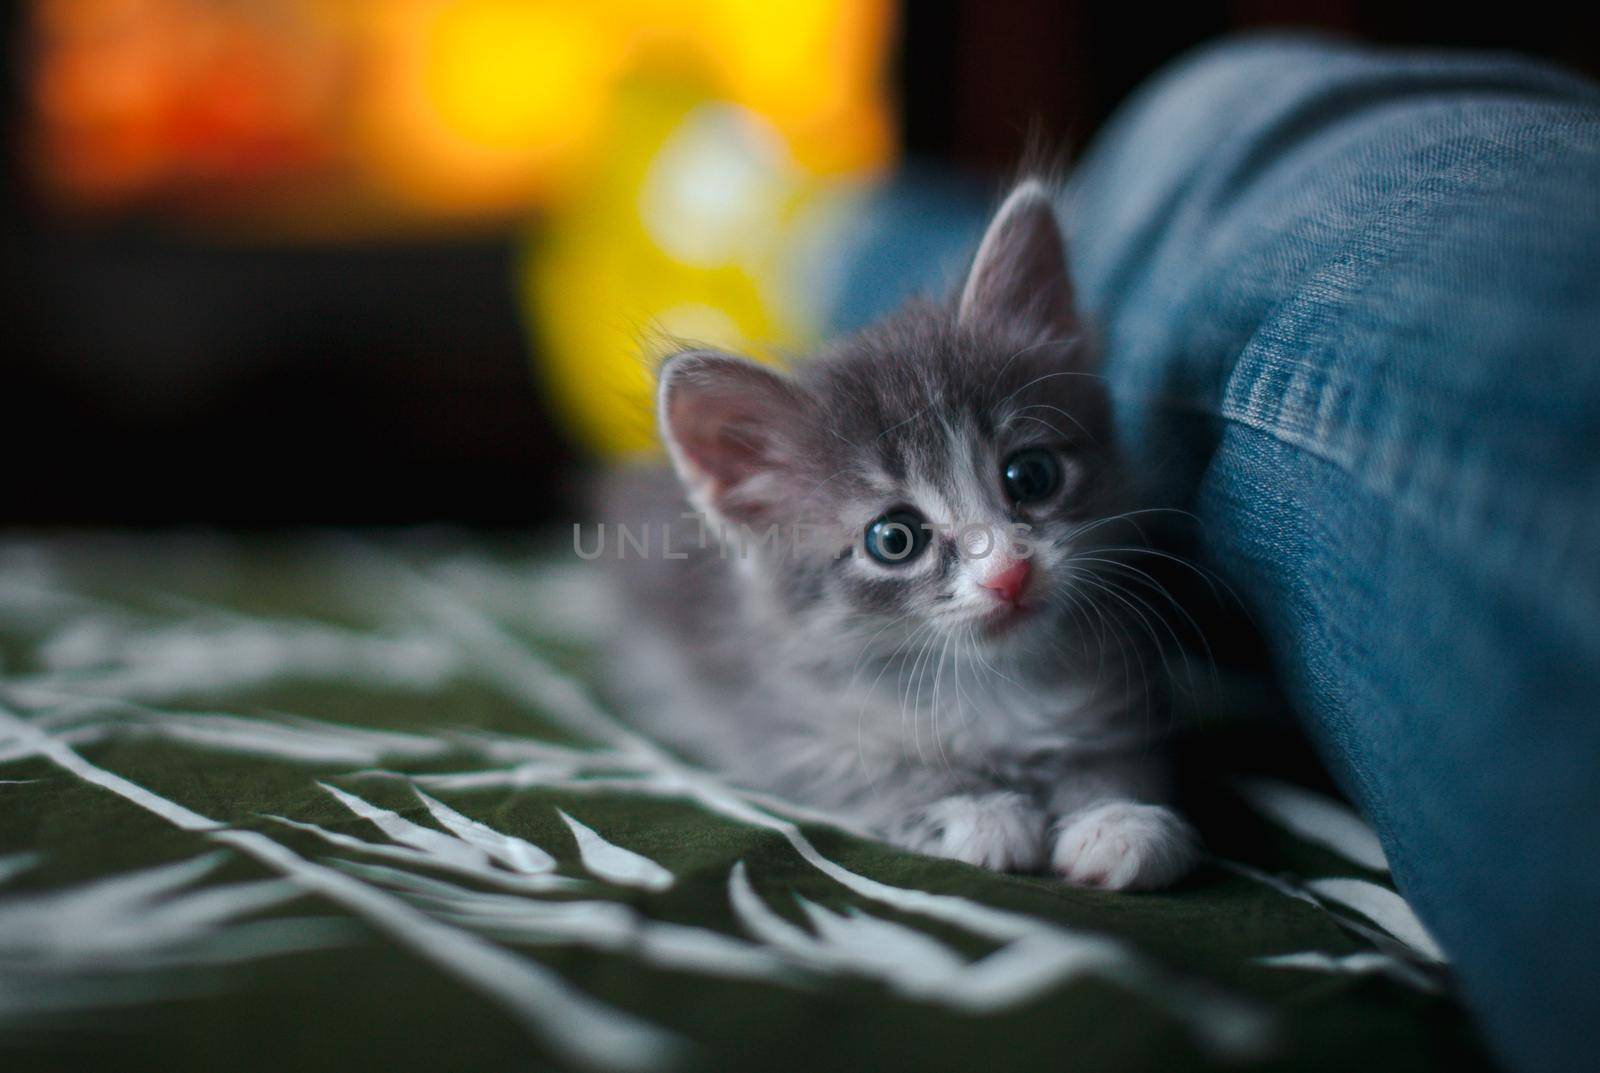 A grey kitten lying on the sofa next to a man